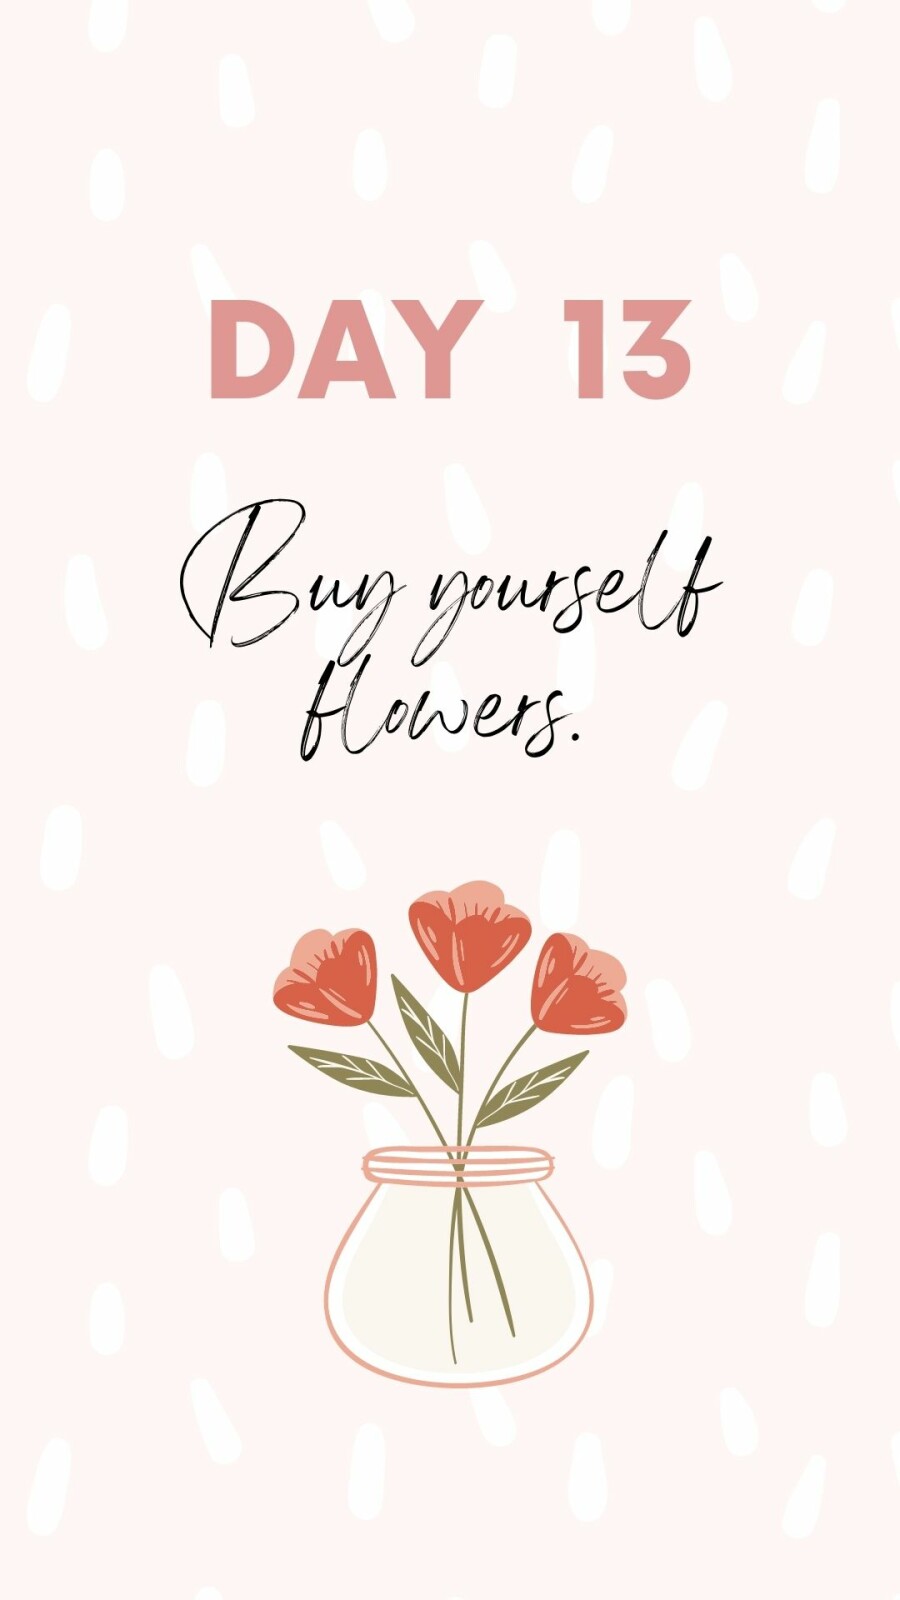 Self Love 101 Buy yourself flowers - day 13